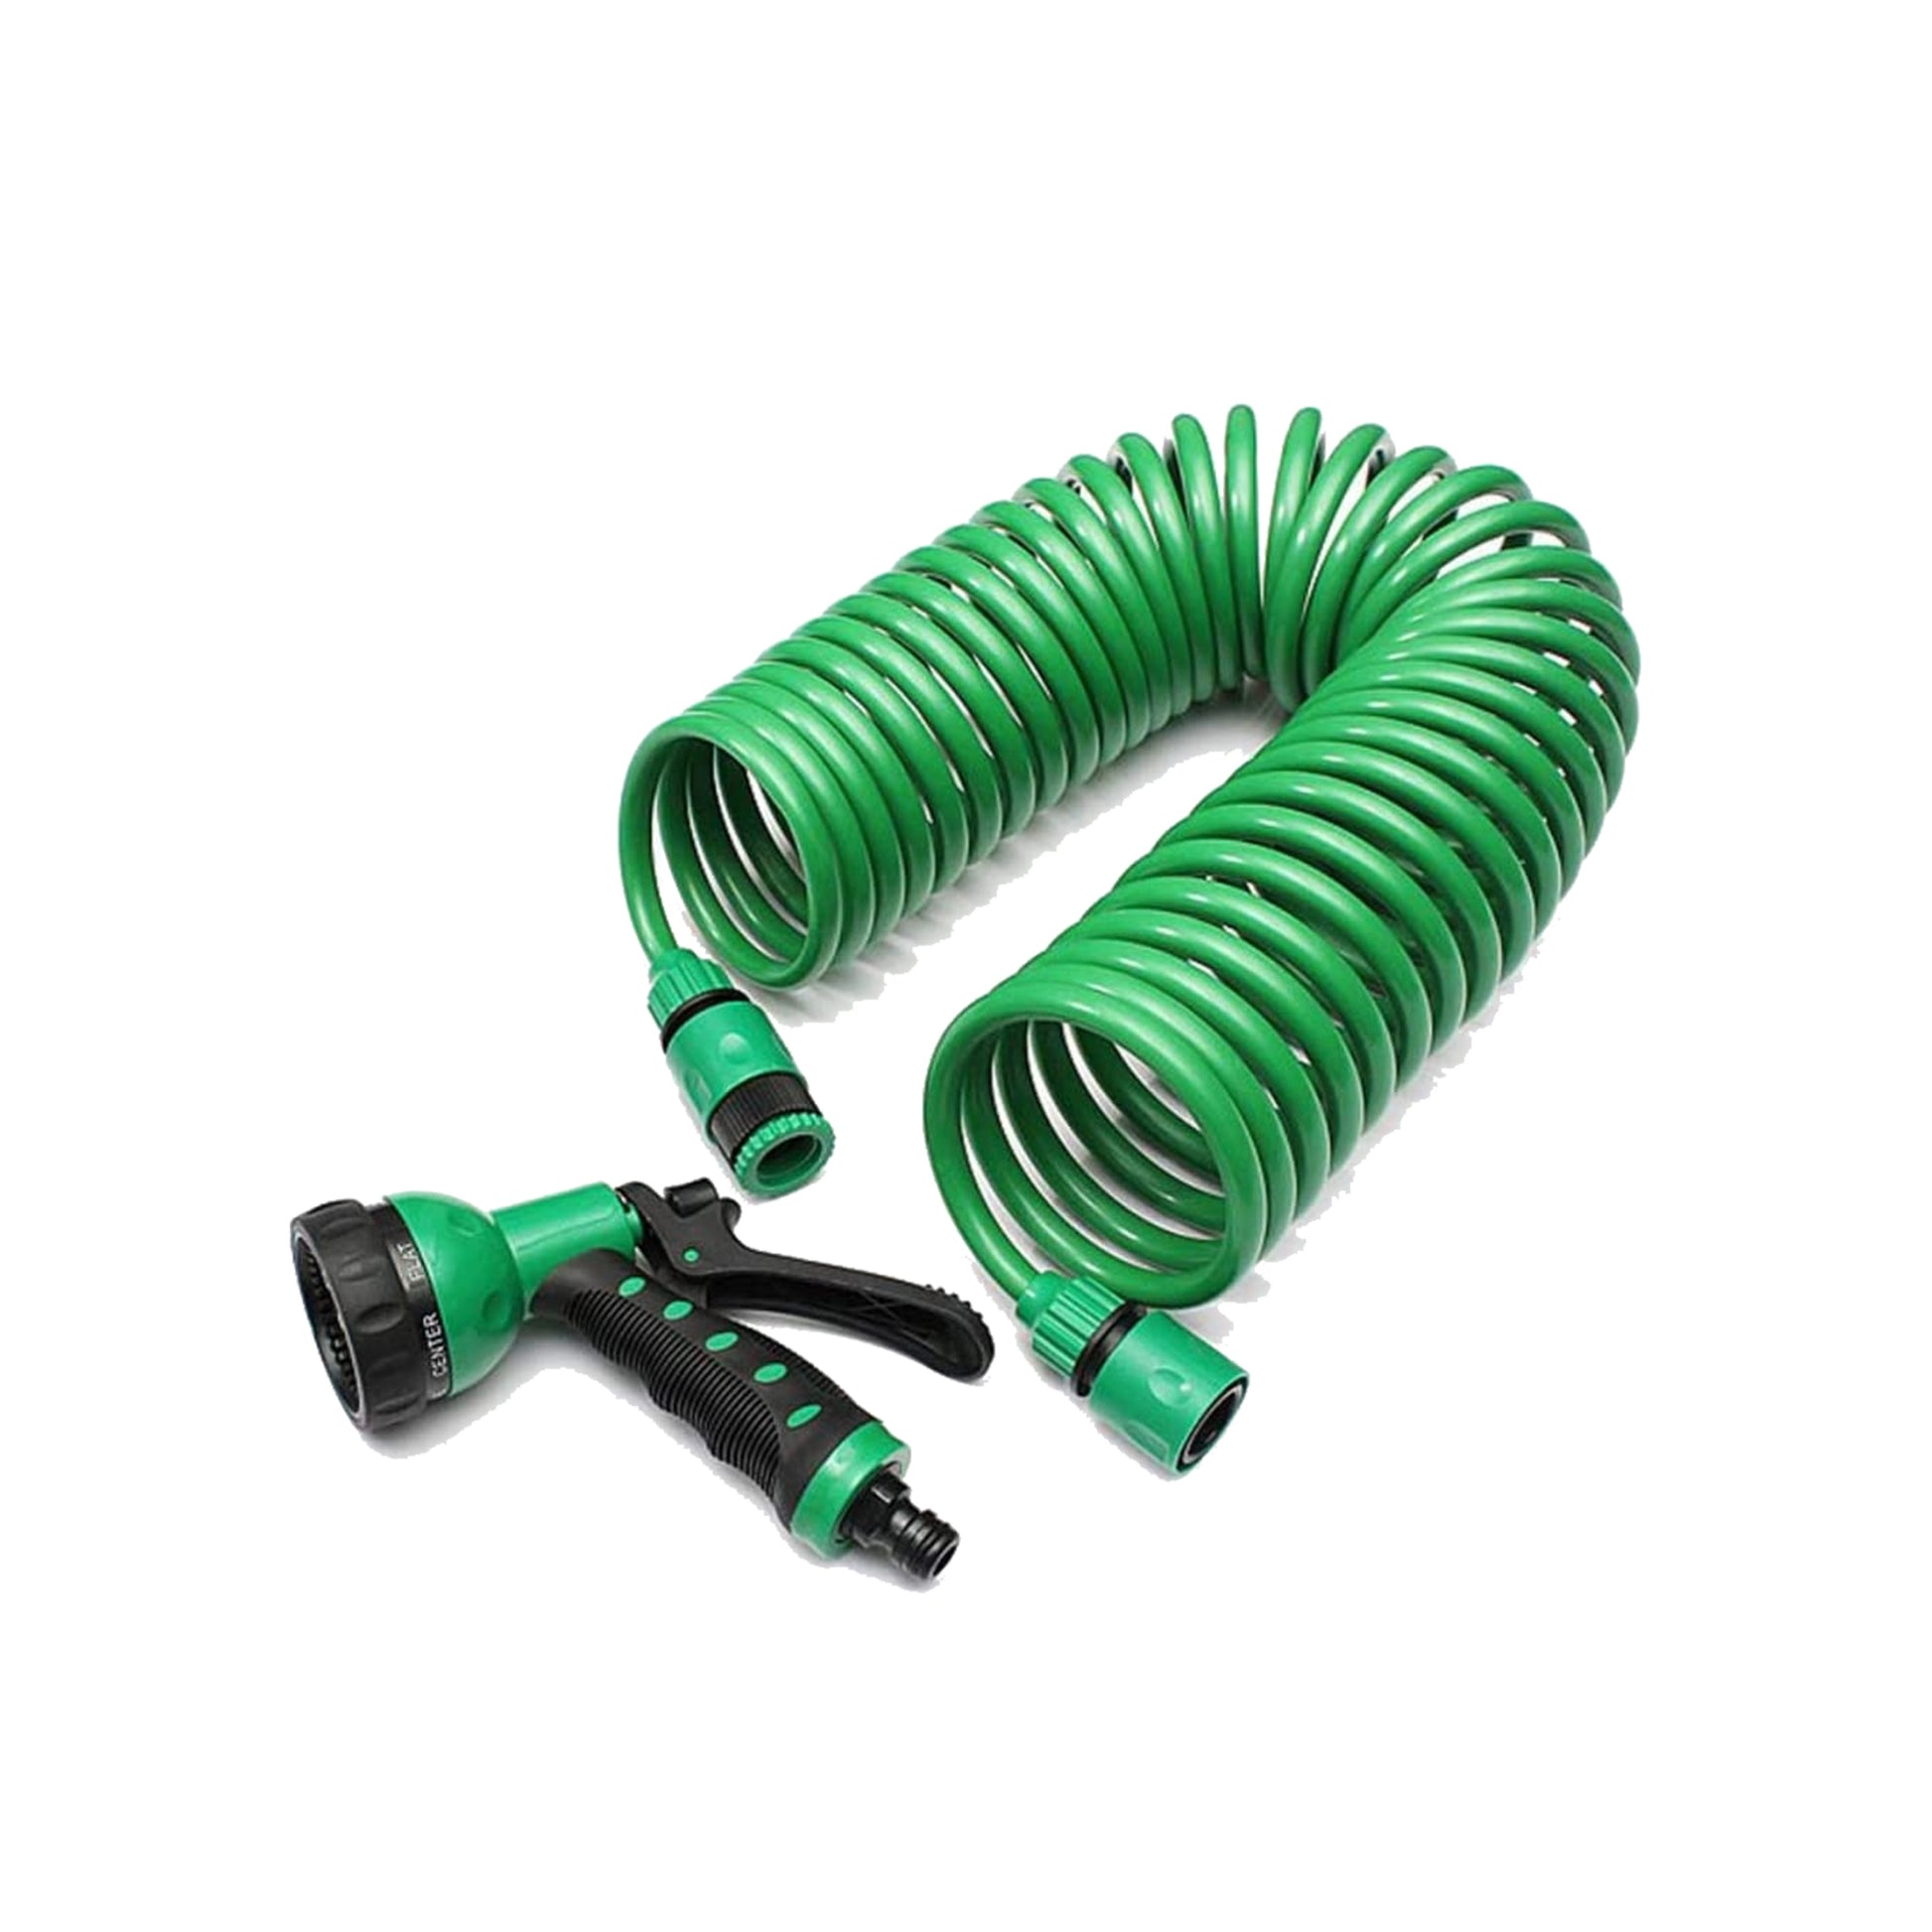 Country-Comfort-Pet-Pamper-15m-Retractable-Spring-Hose-7-Settings-